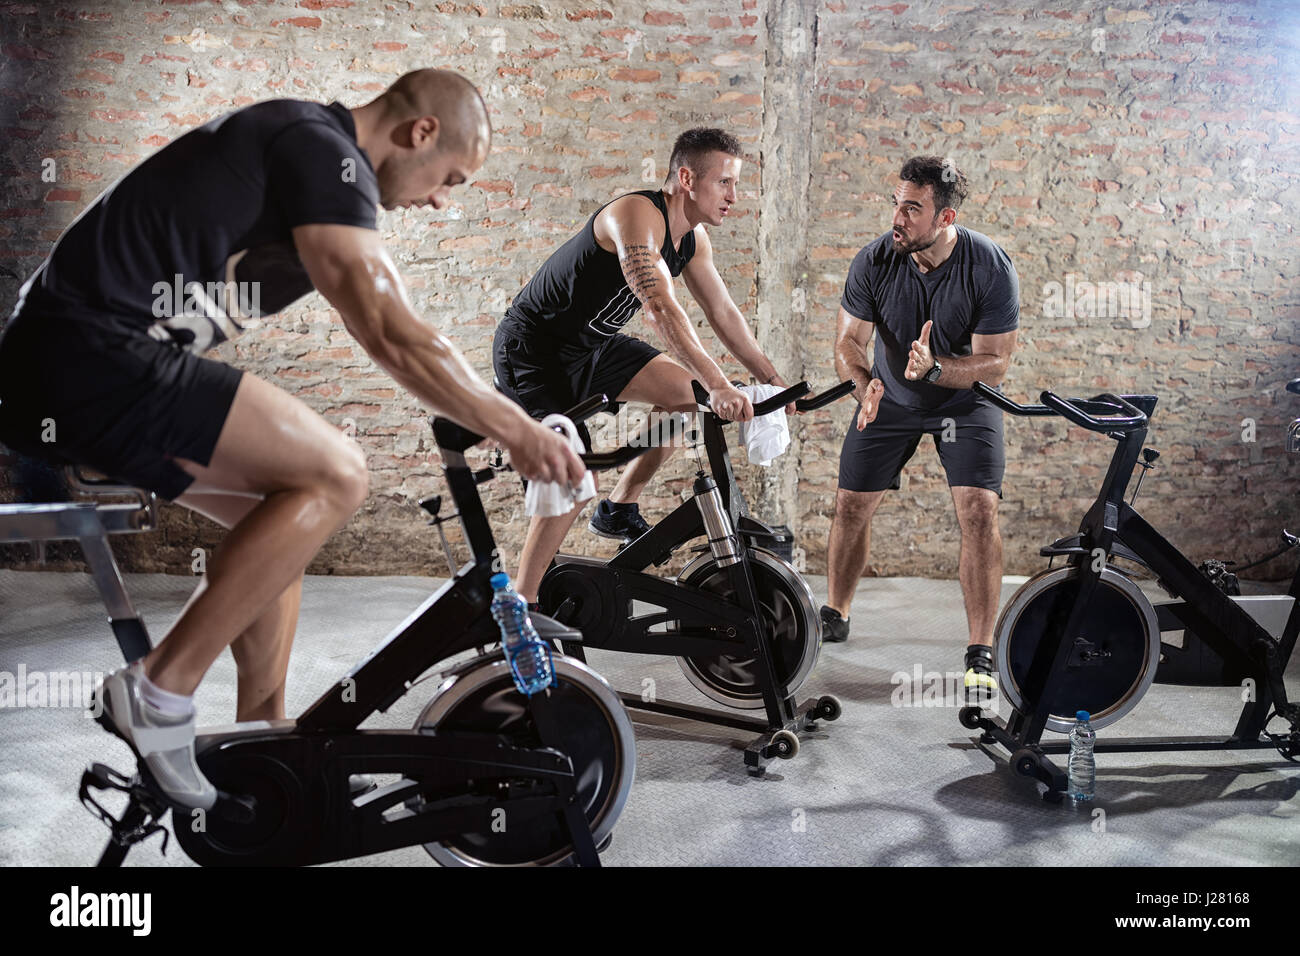 Cardio training on bicycle, sport and healthy lifestyle Stock Photo